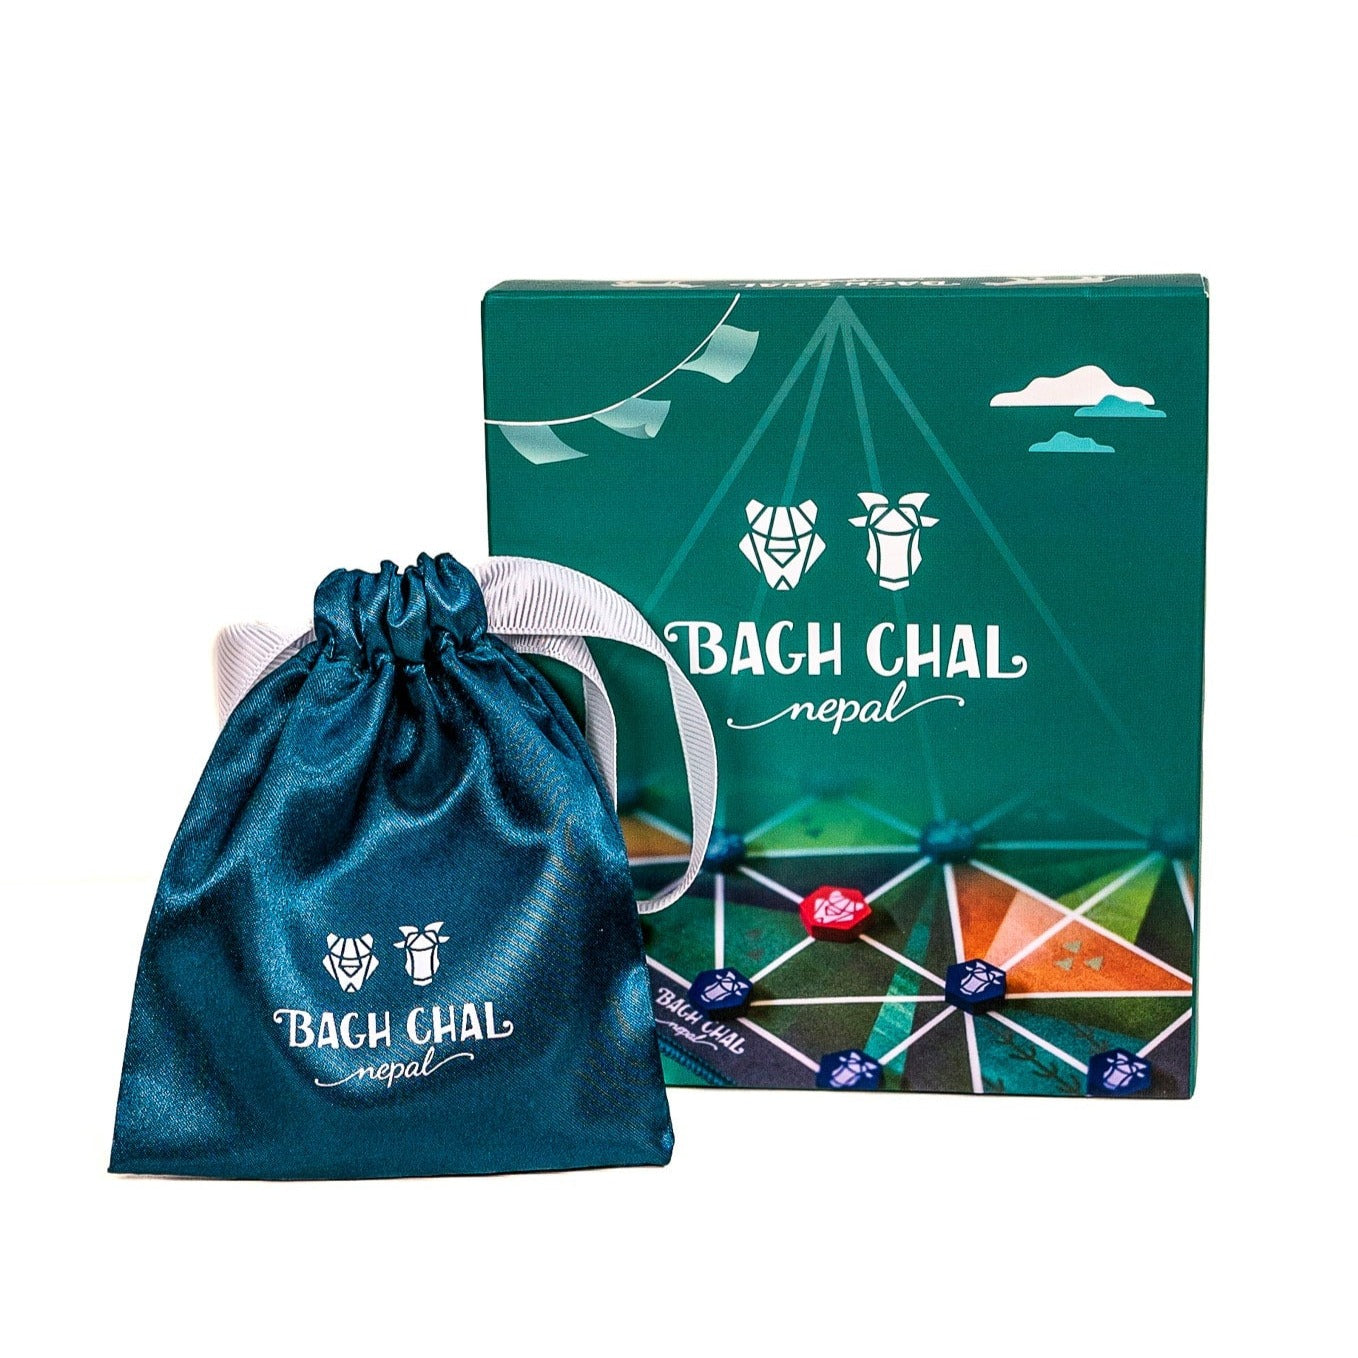 Bagh Chal deluxe edition in box